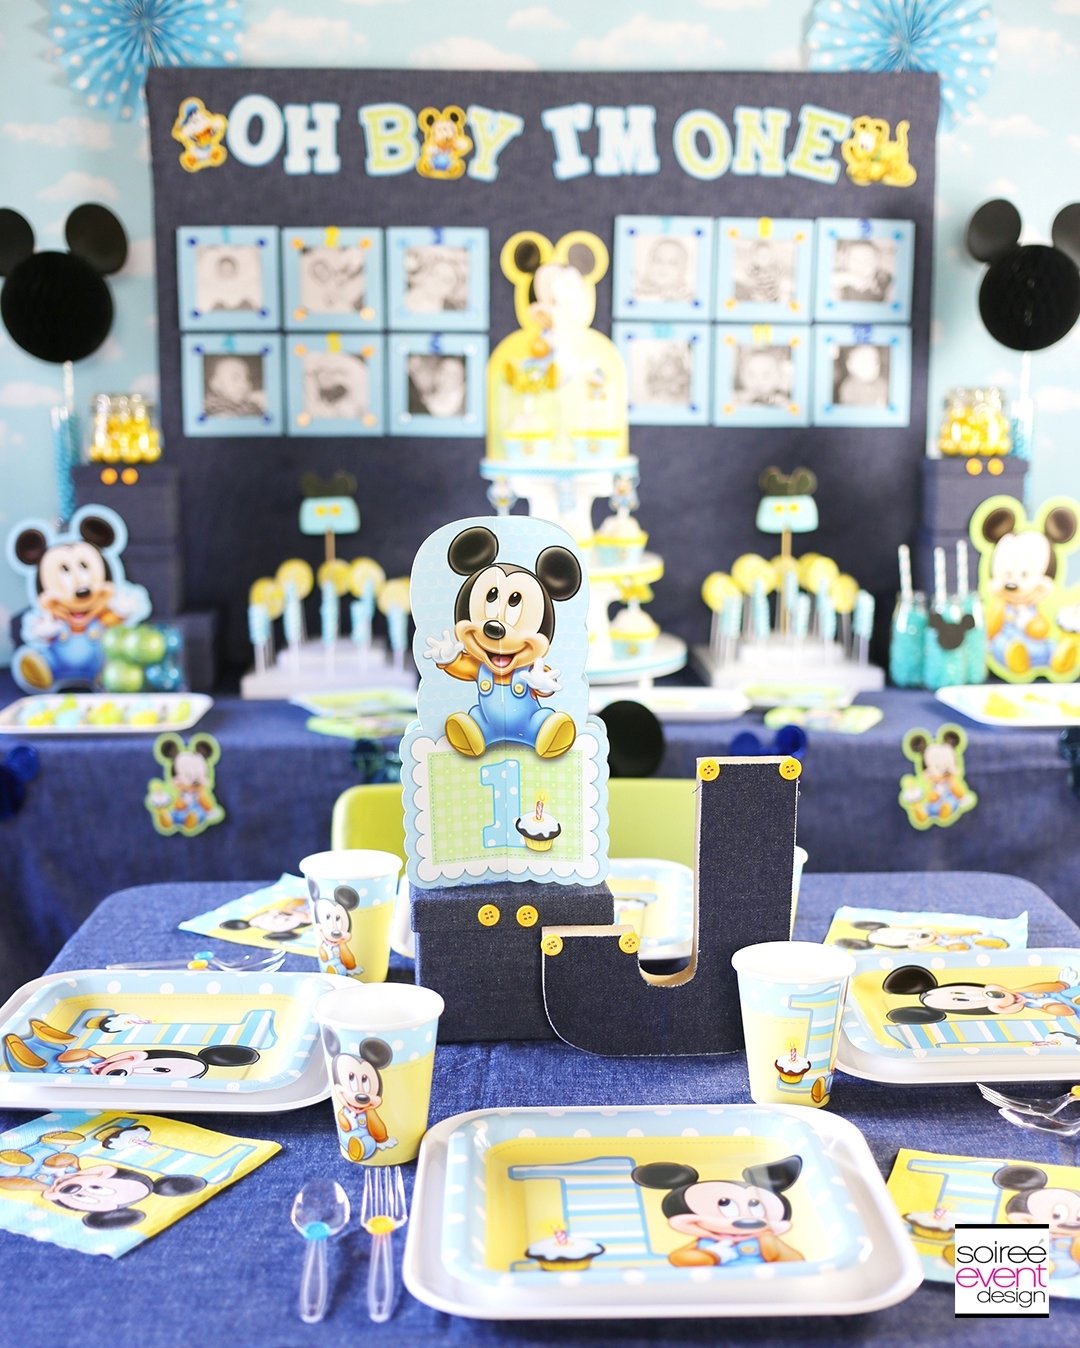 10 Ideal Birthday Party Ideas For 1 Year Old Boy nonsensical 1 year old birthday party game ideas themes together 1 2023